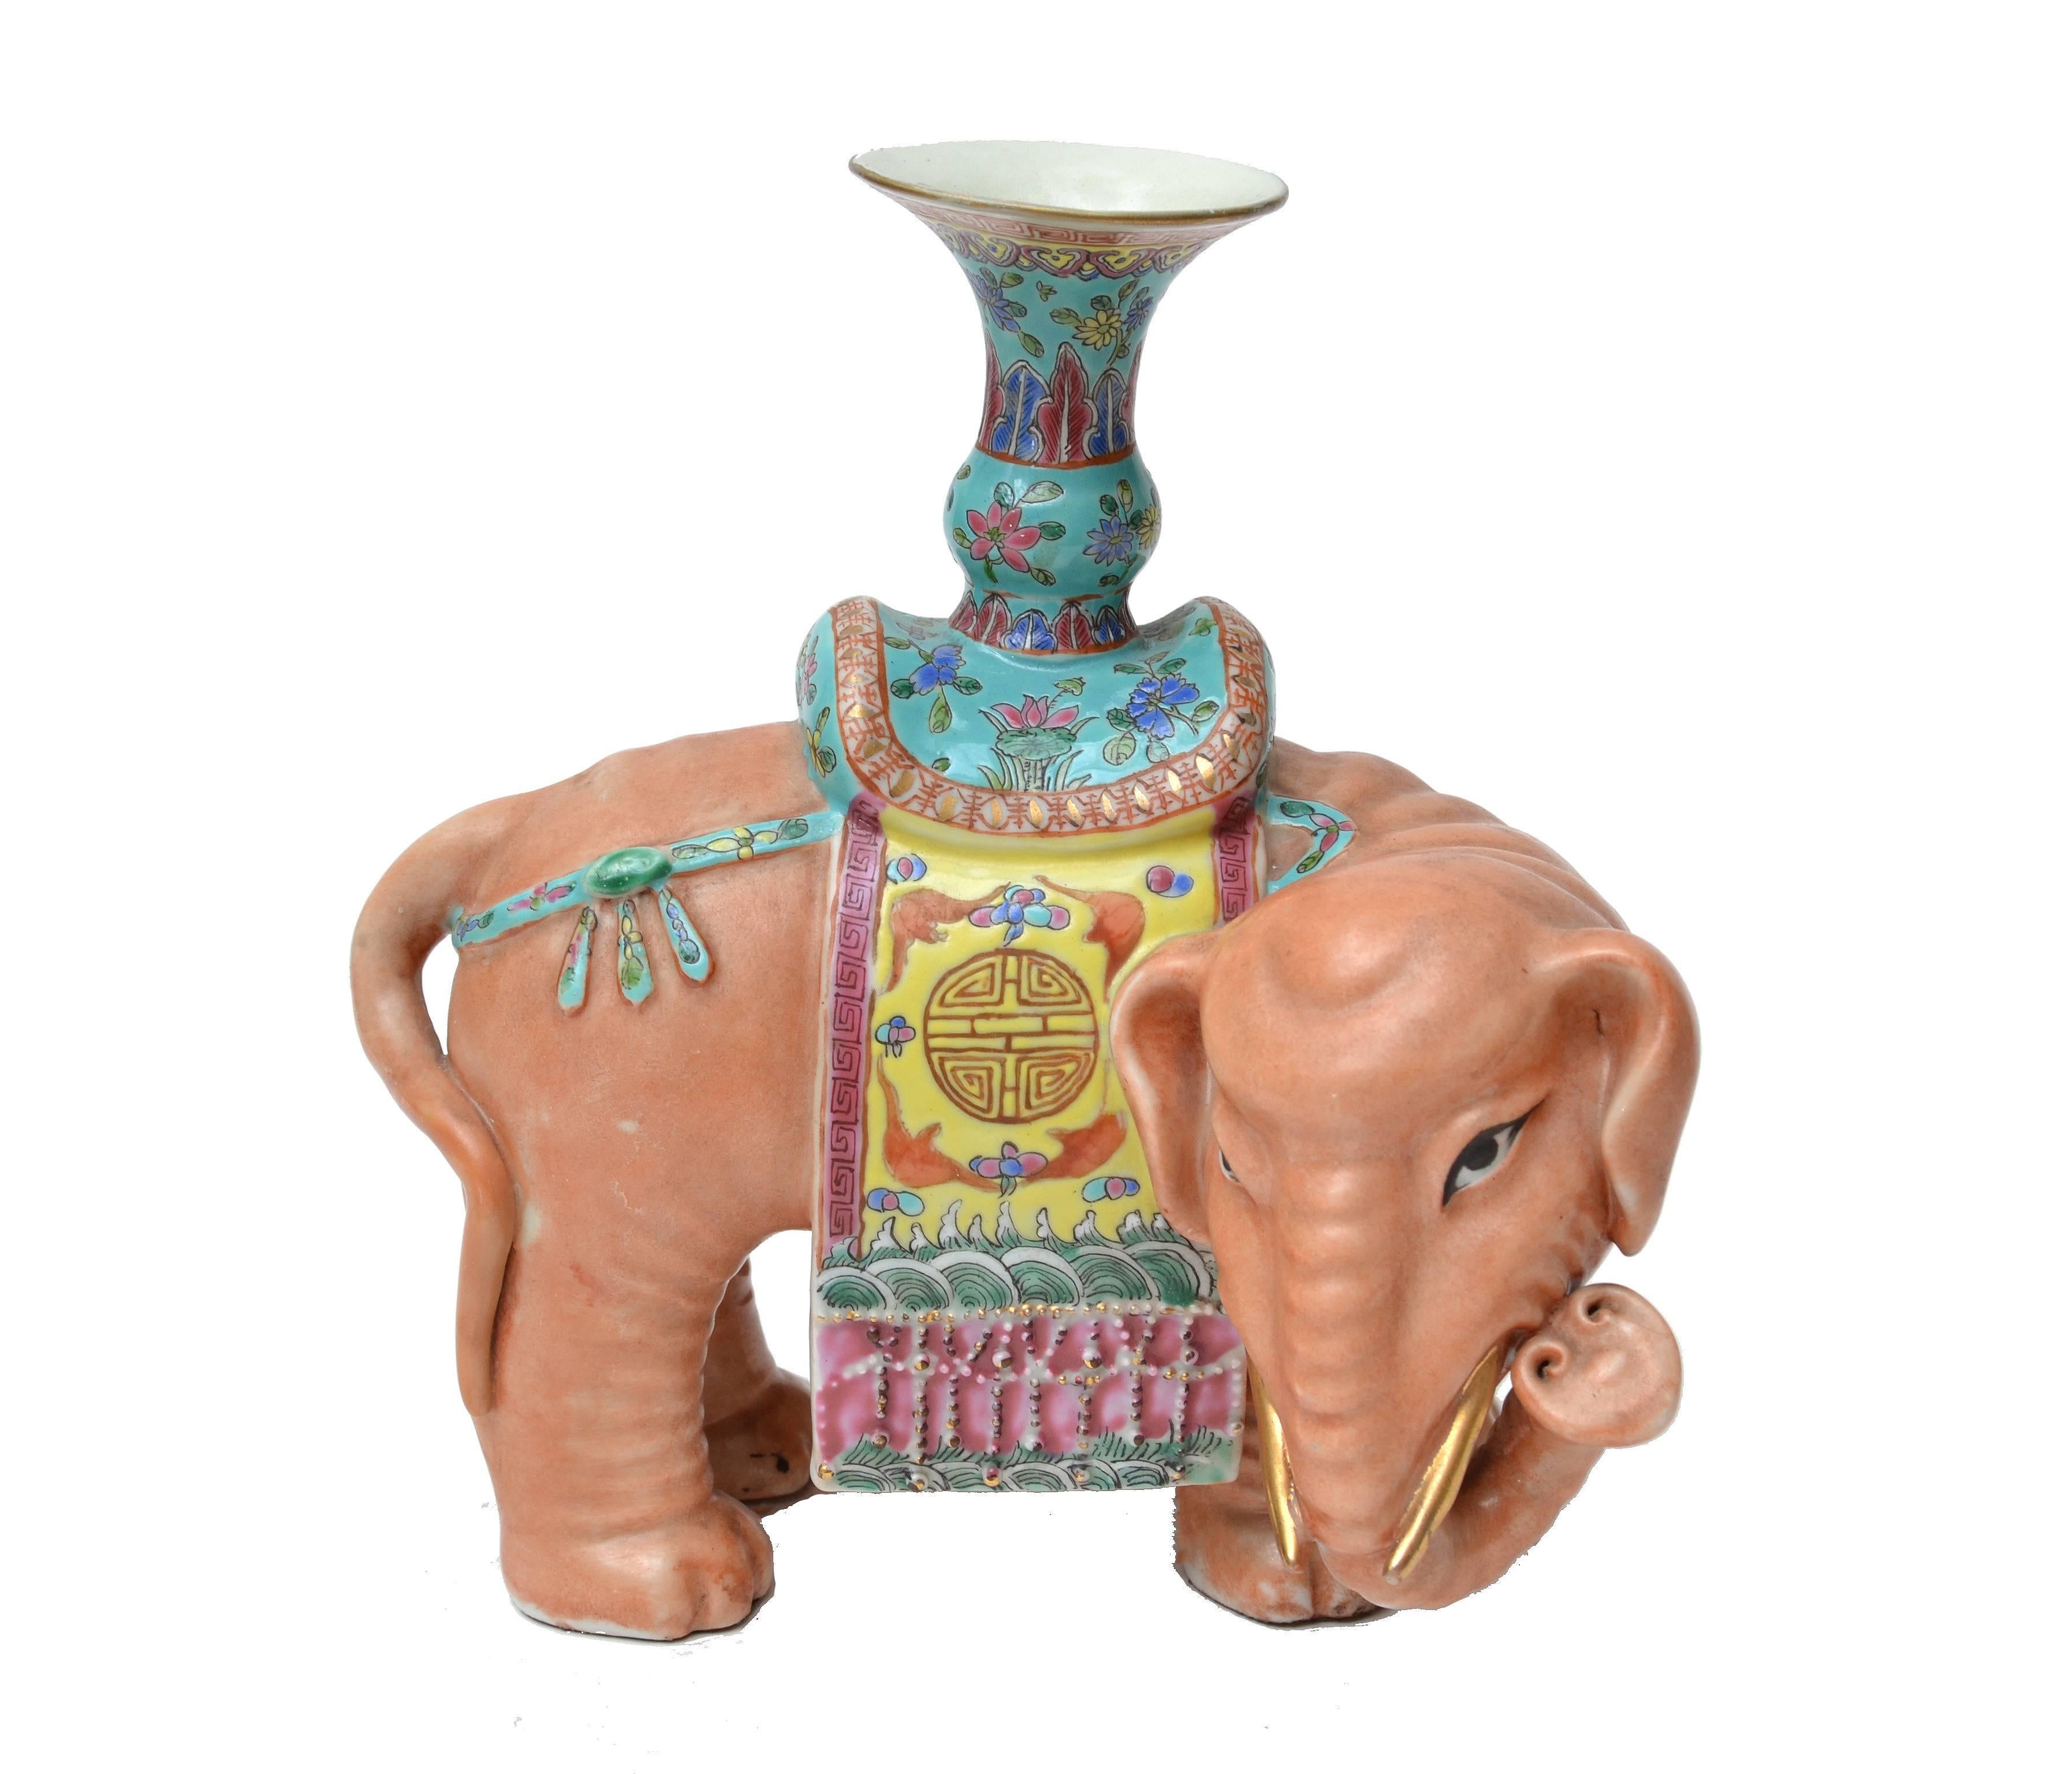 Chinese ceramic elephant sculpture.
From the Qing Dynasty Ca. 1725
Marked under the saddle.